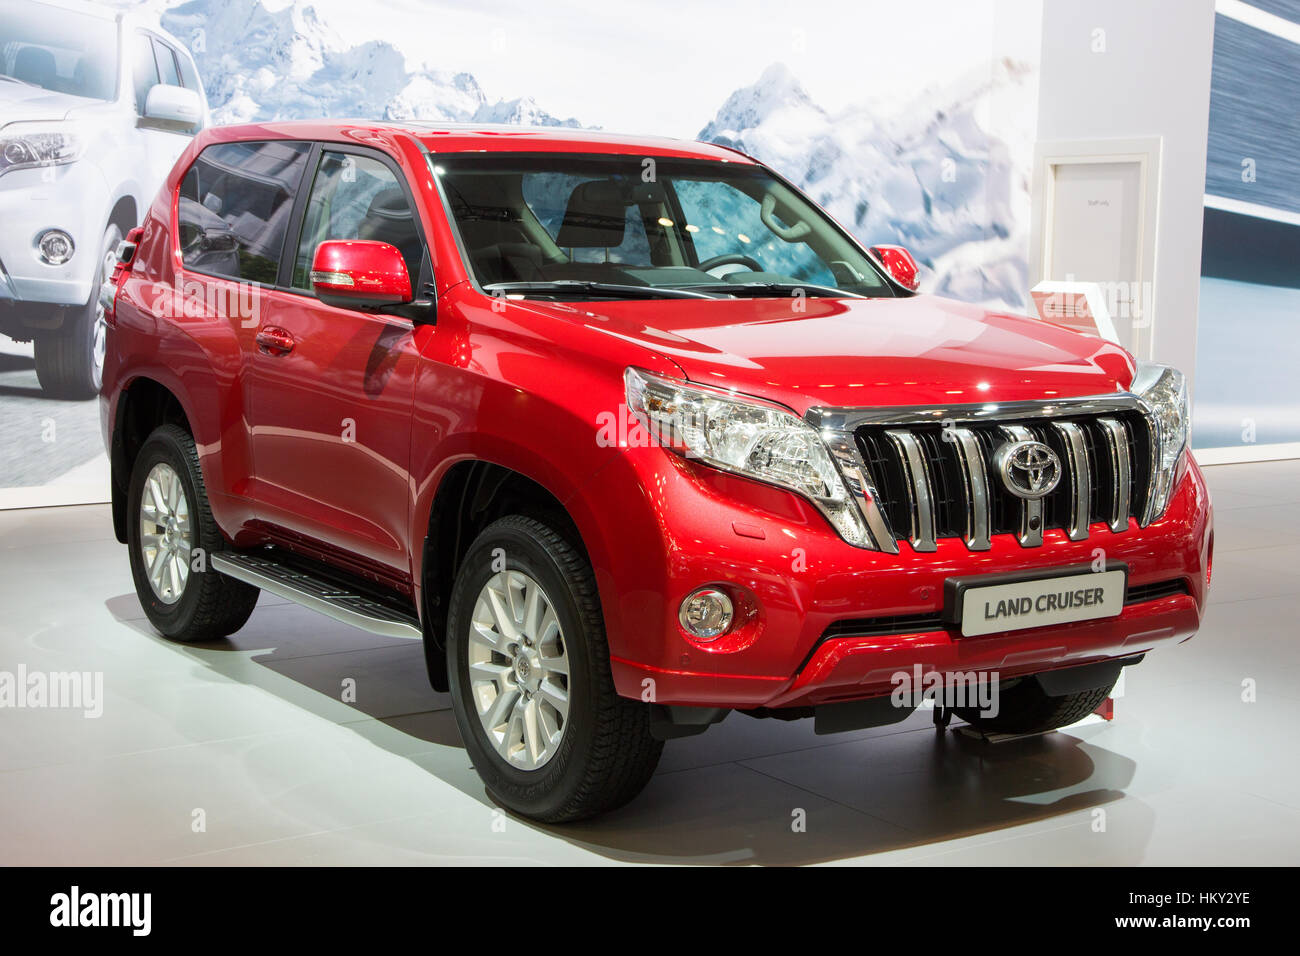 BRUSSELS - JAN 12, 2016: Toyota Land Cruiser Prado on display at the Brussels Motor Show. Stock Photo